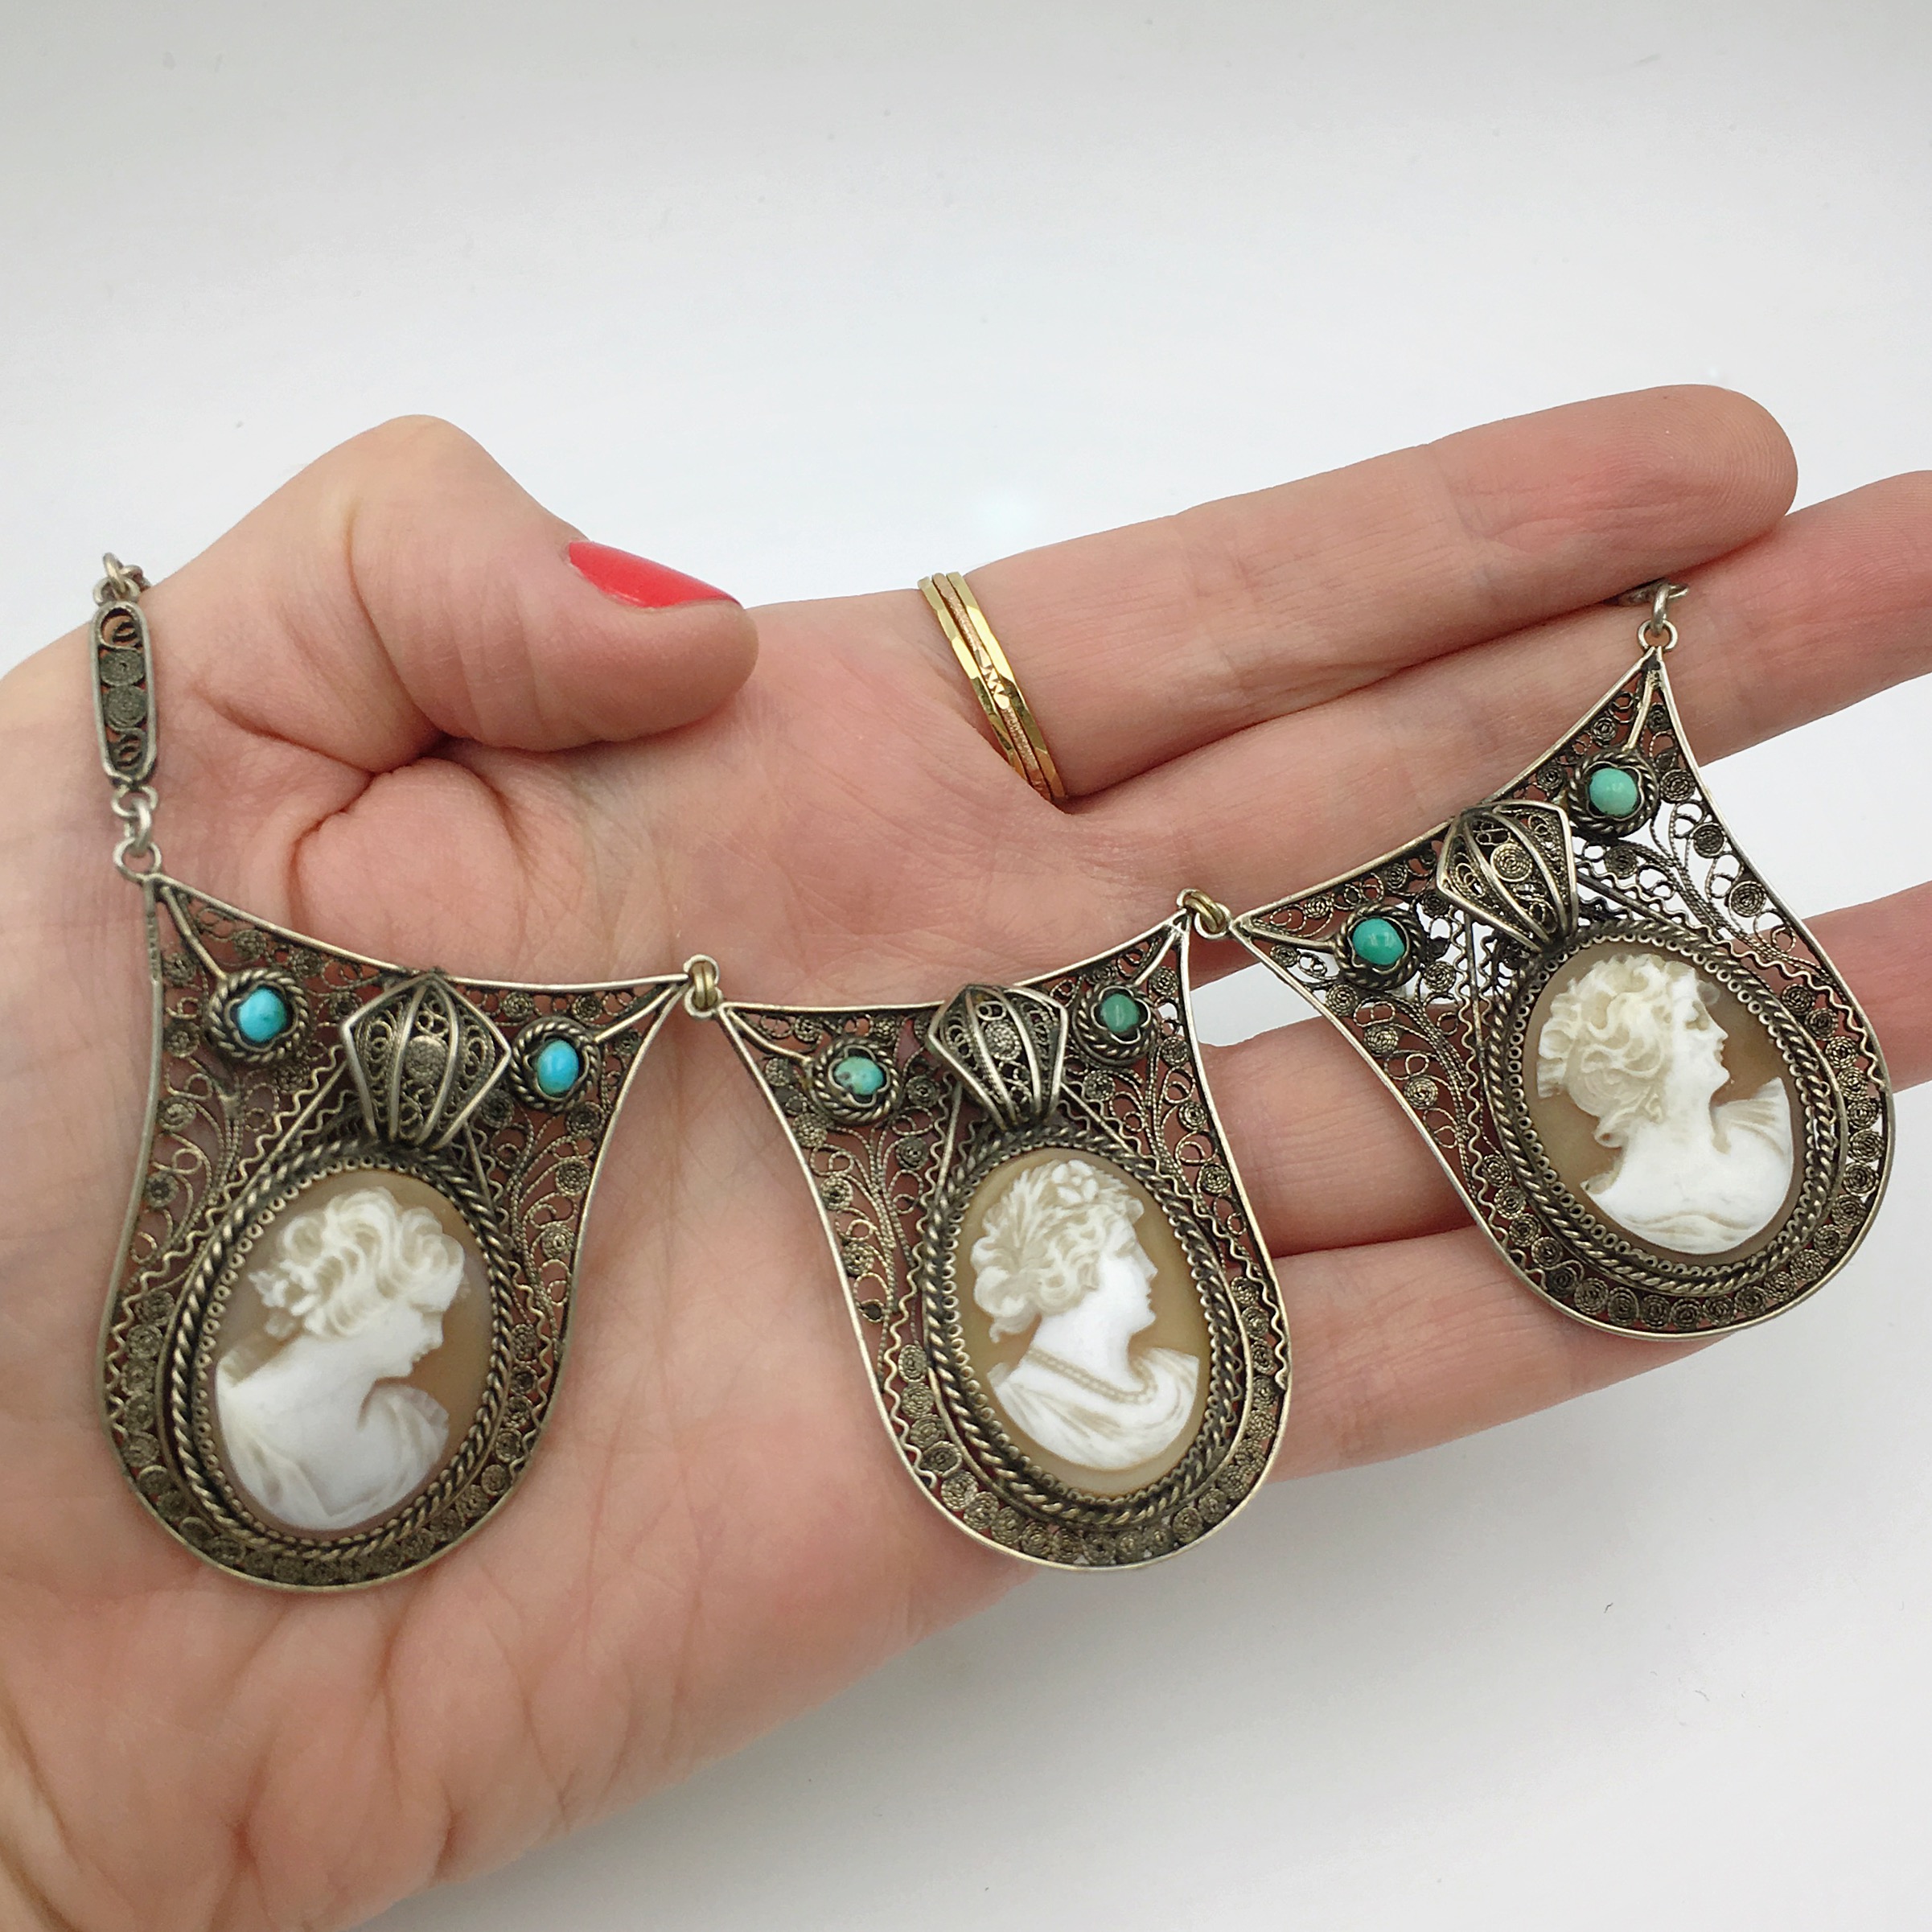 vintage cameo necklace at Reverie vintage NYC